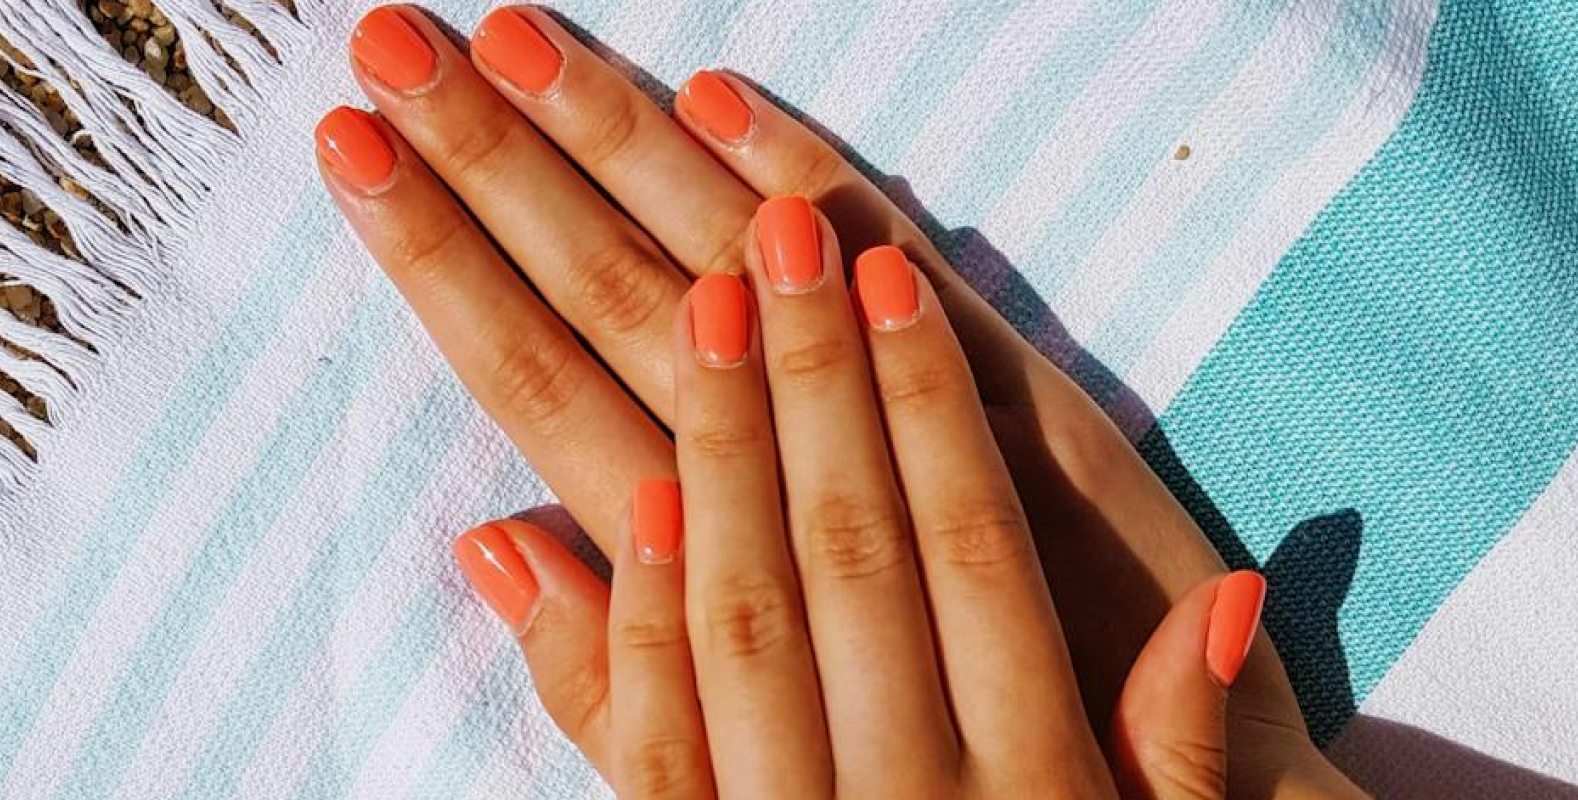 Top 5 Manicure Trends for Summer